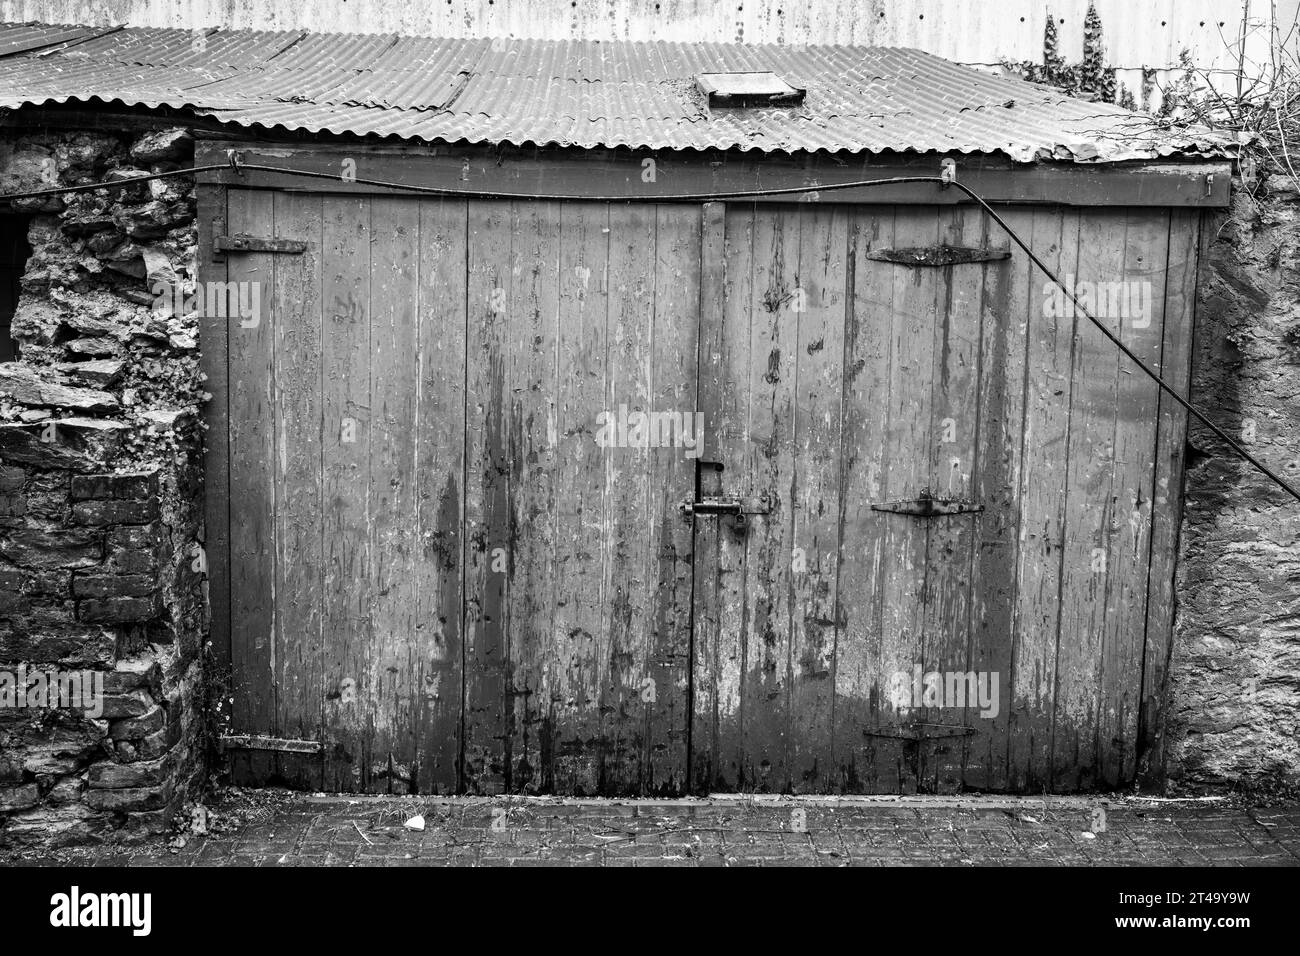 Ramshackle shed, shot in black and white, with vertical wood panelled doors between stone walls, found just off Island Street, Salcombe. Stock Photo